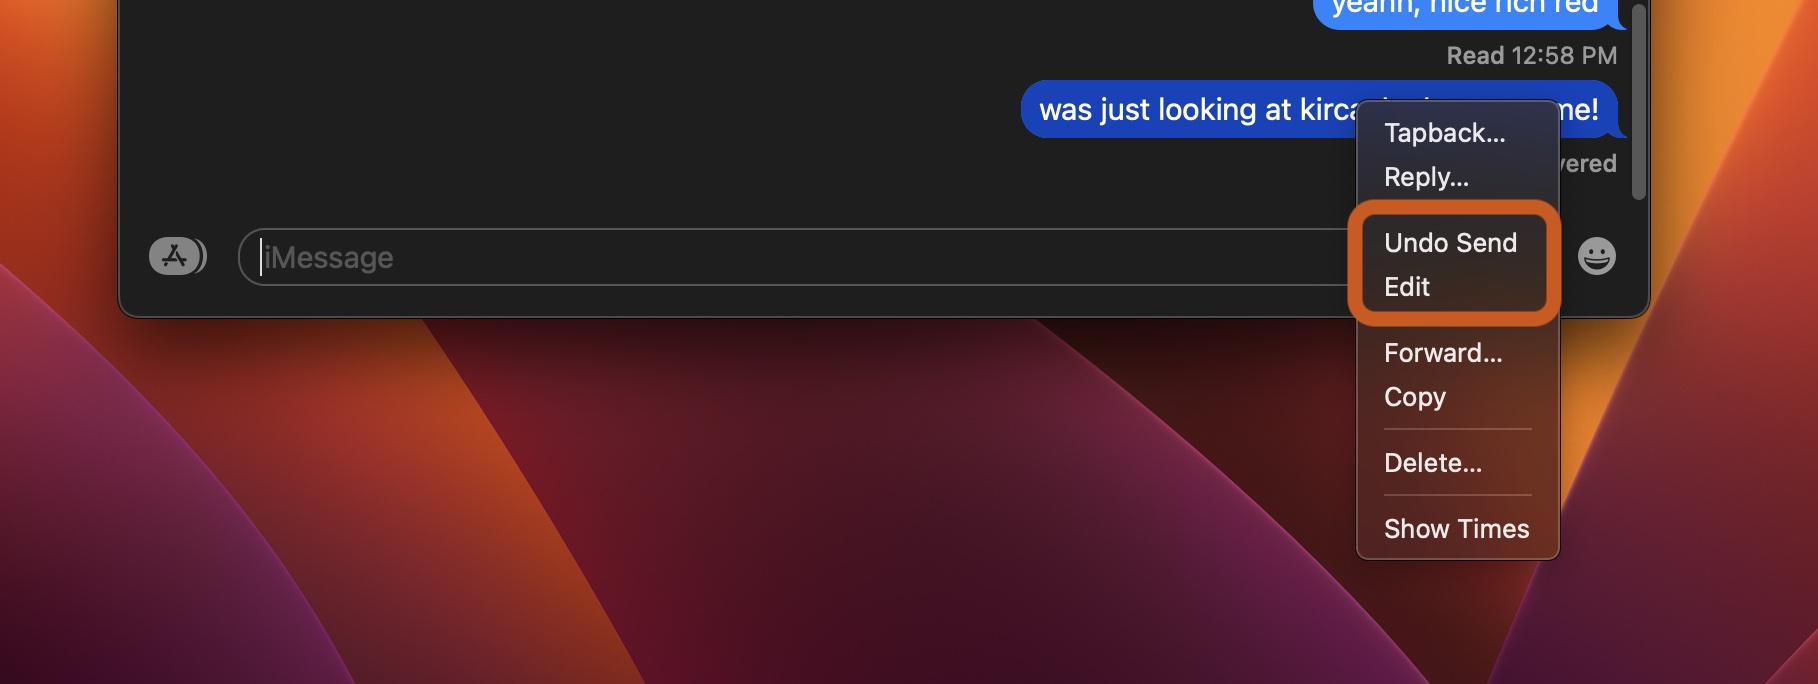 macOS Ventura includes Unsent Messages and edit